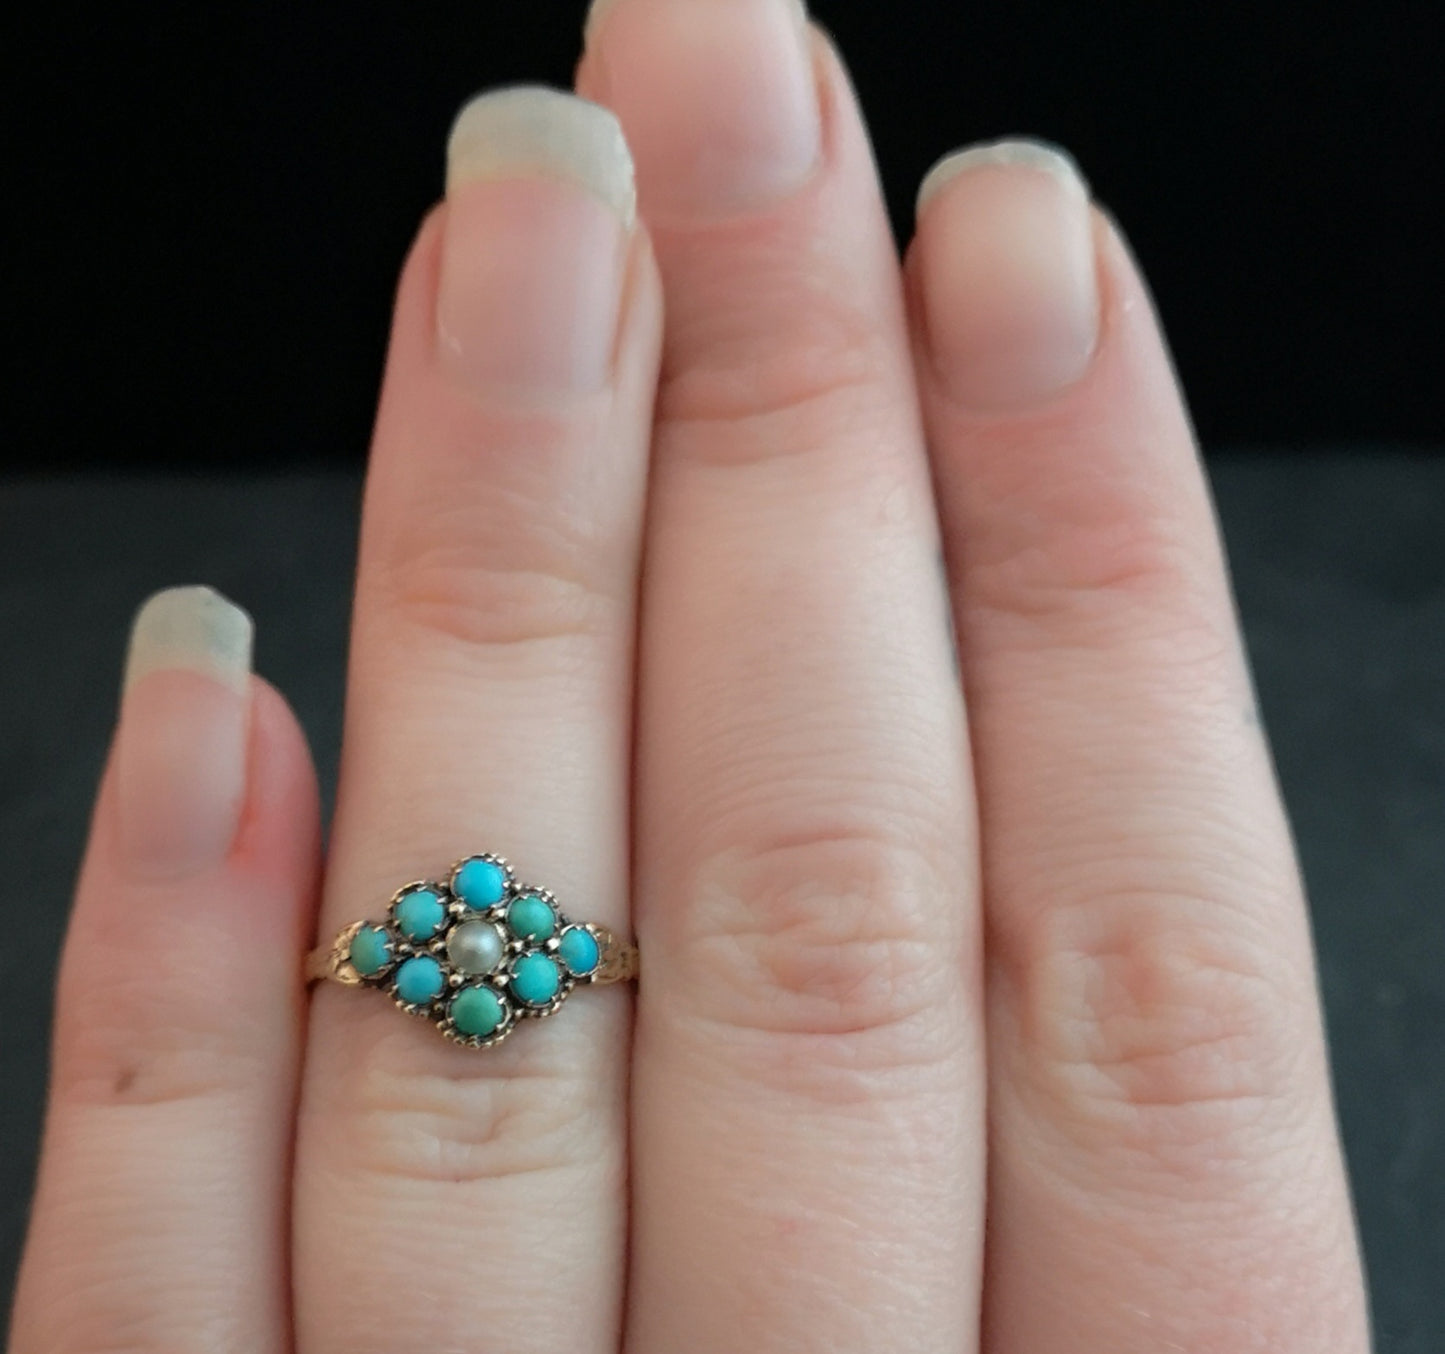 Antique turquoise and pearl ring, 15ct gold